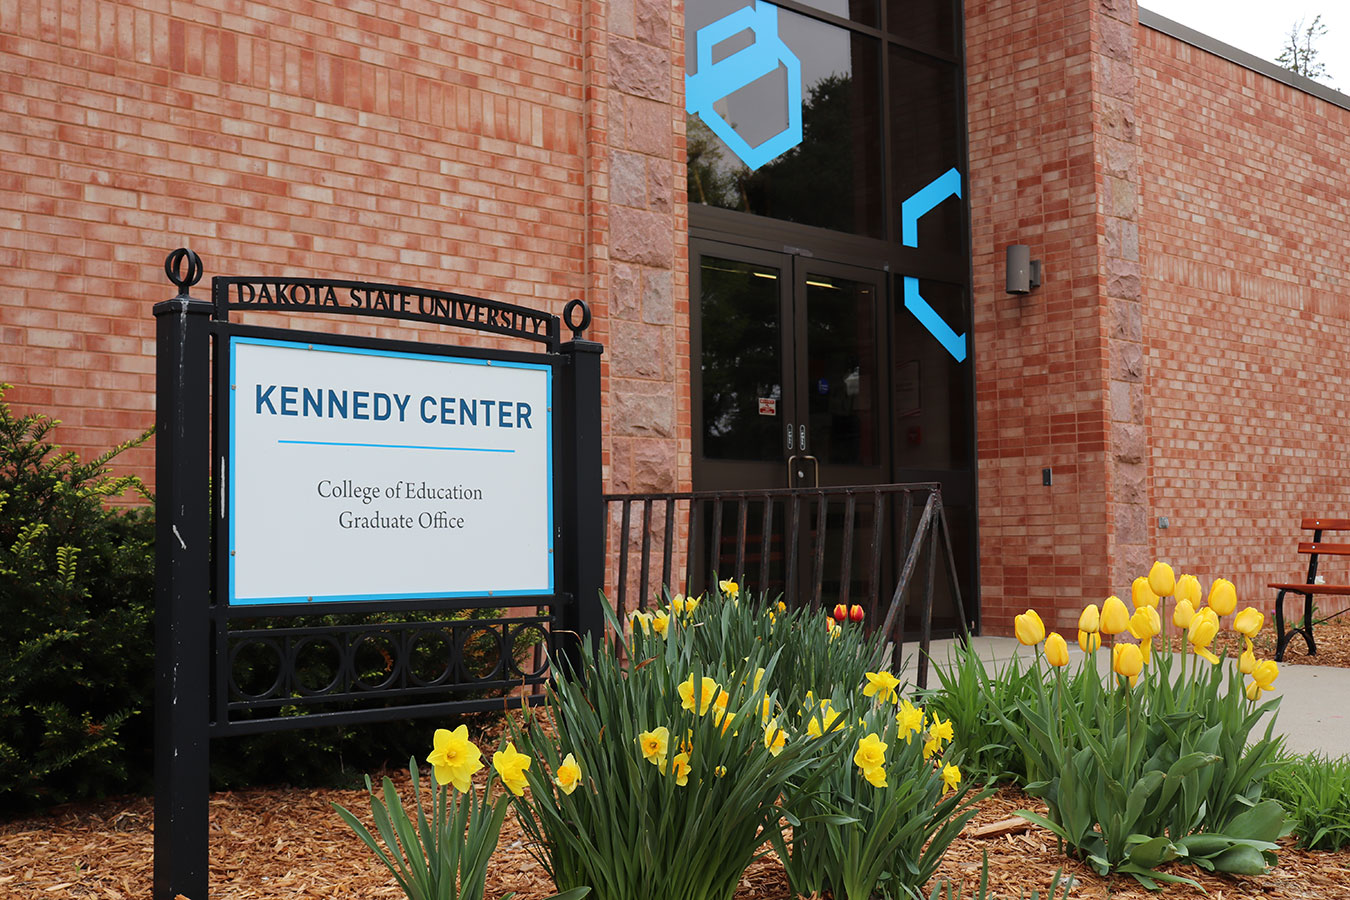 Image of the Kennedy Center at DSU